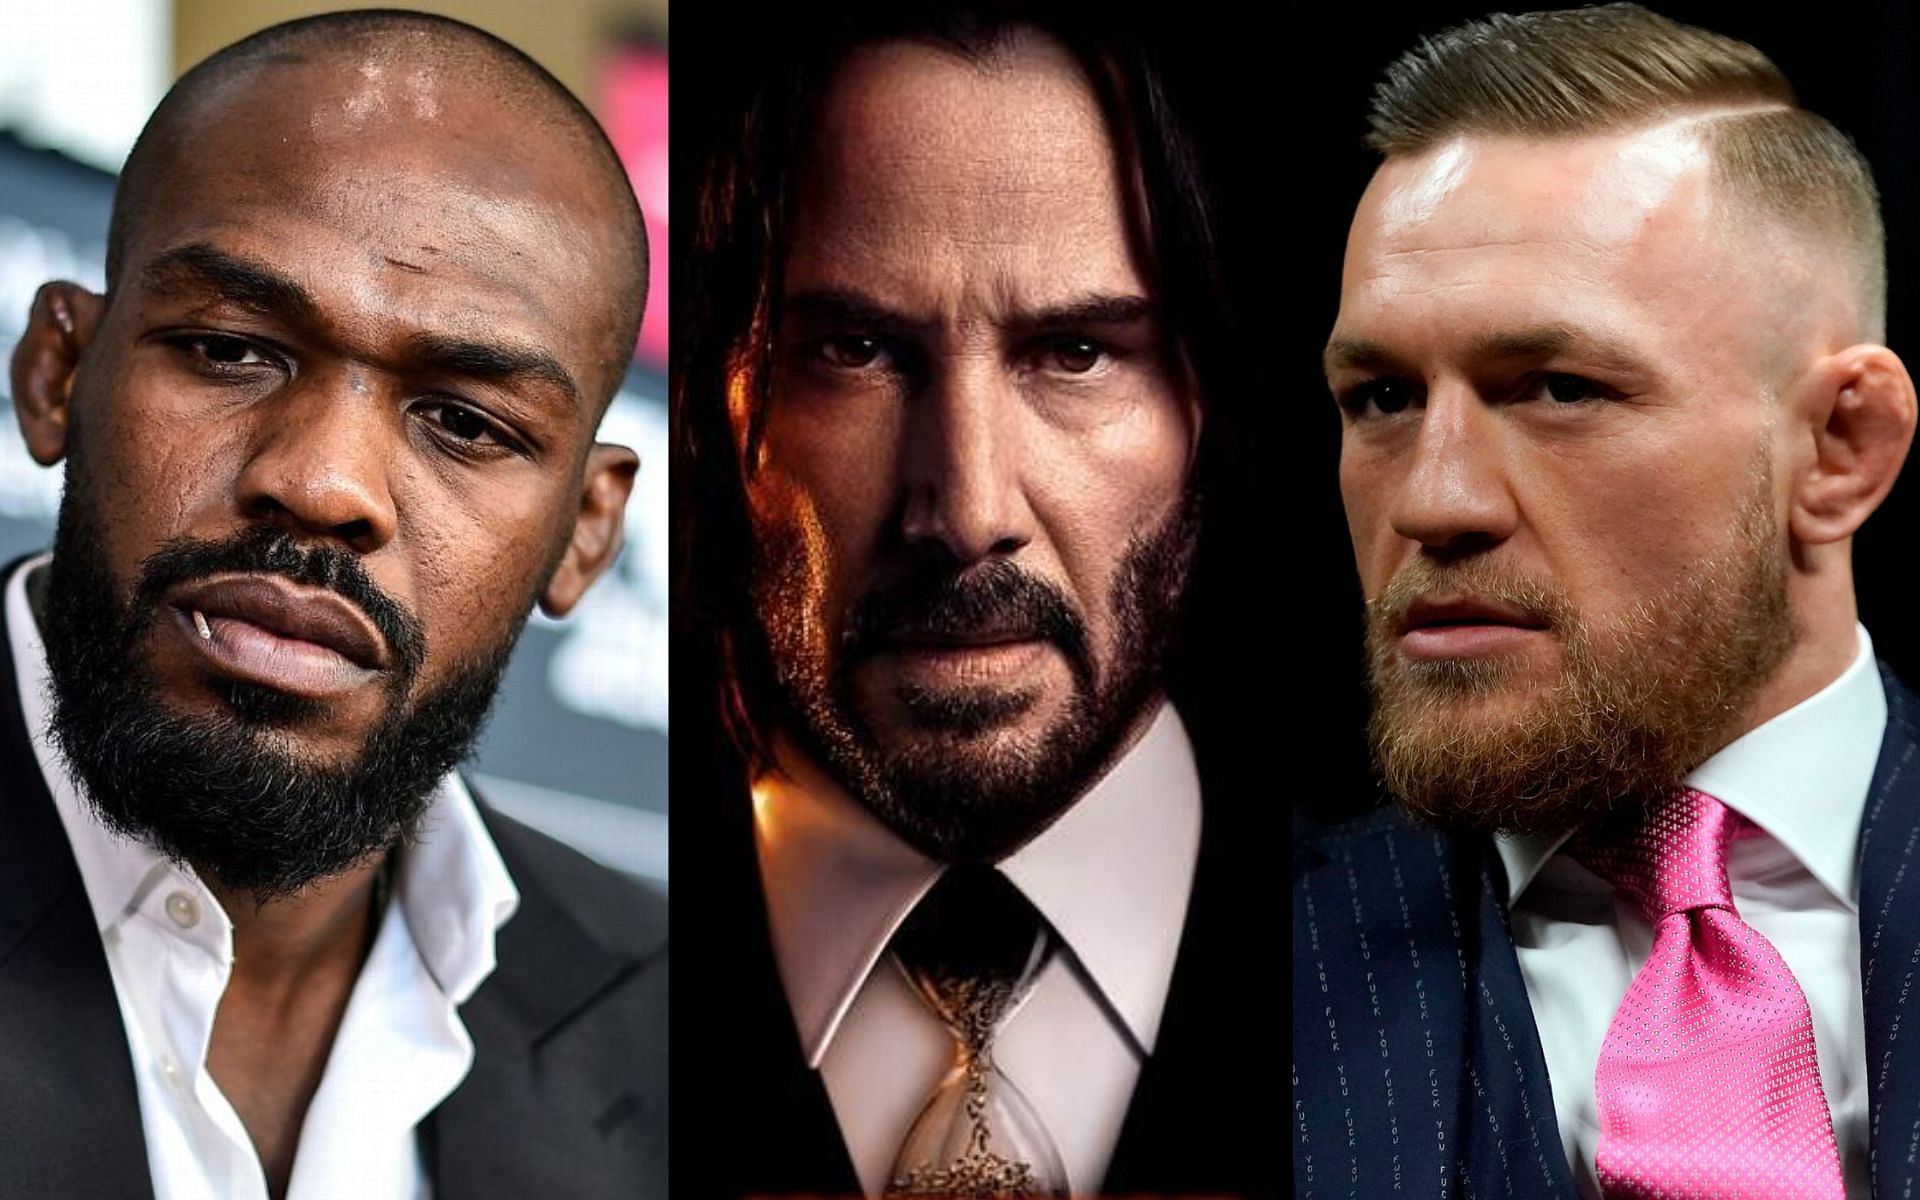 Jon Jones (left), Keanu Reeves as John Wick (centre), and Conor McGregor (right). [Images courtesy: left image from ESPN, centre image from Lionsgate, and right image from Getty Images]